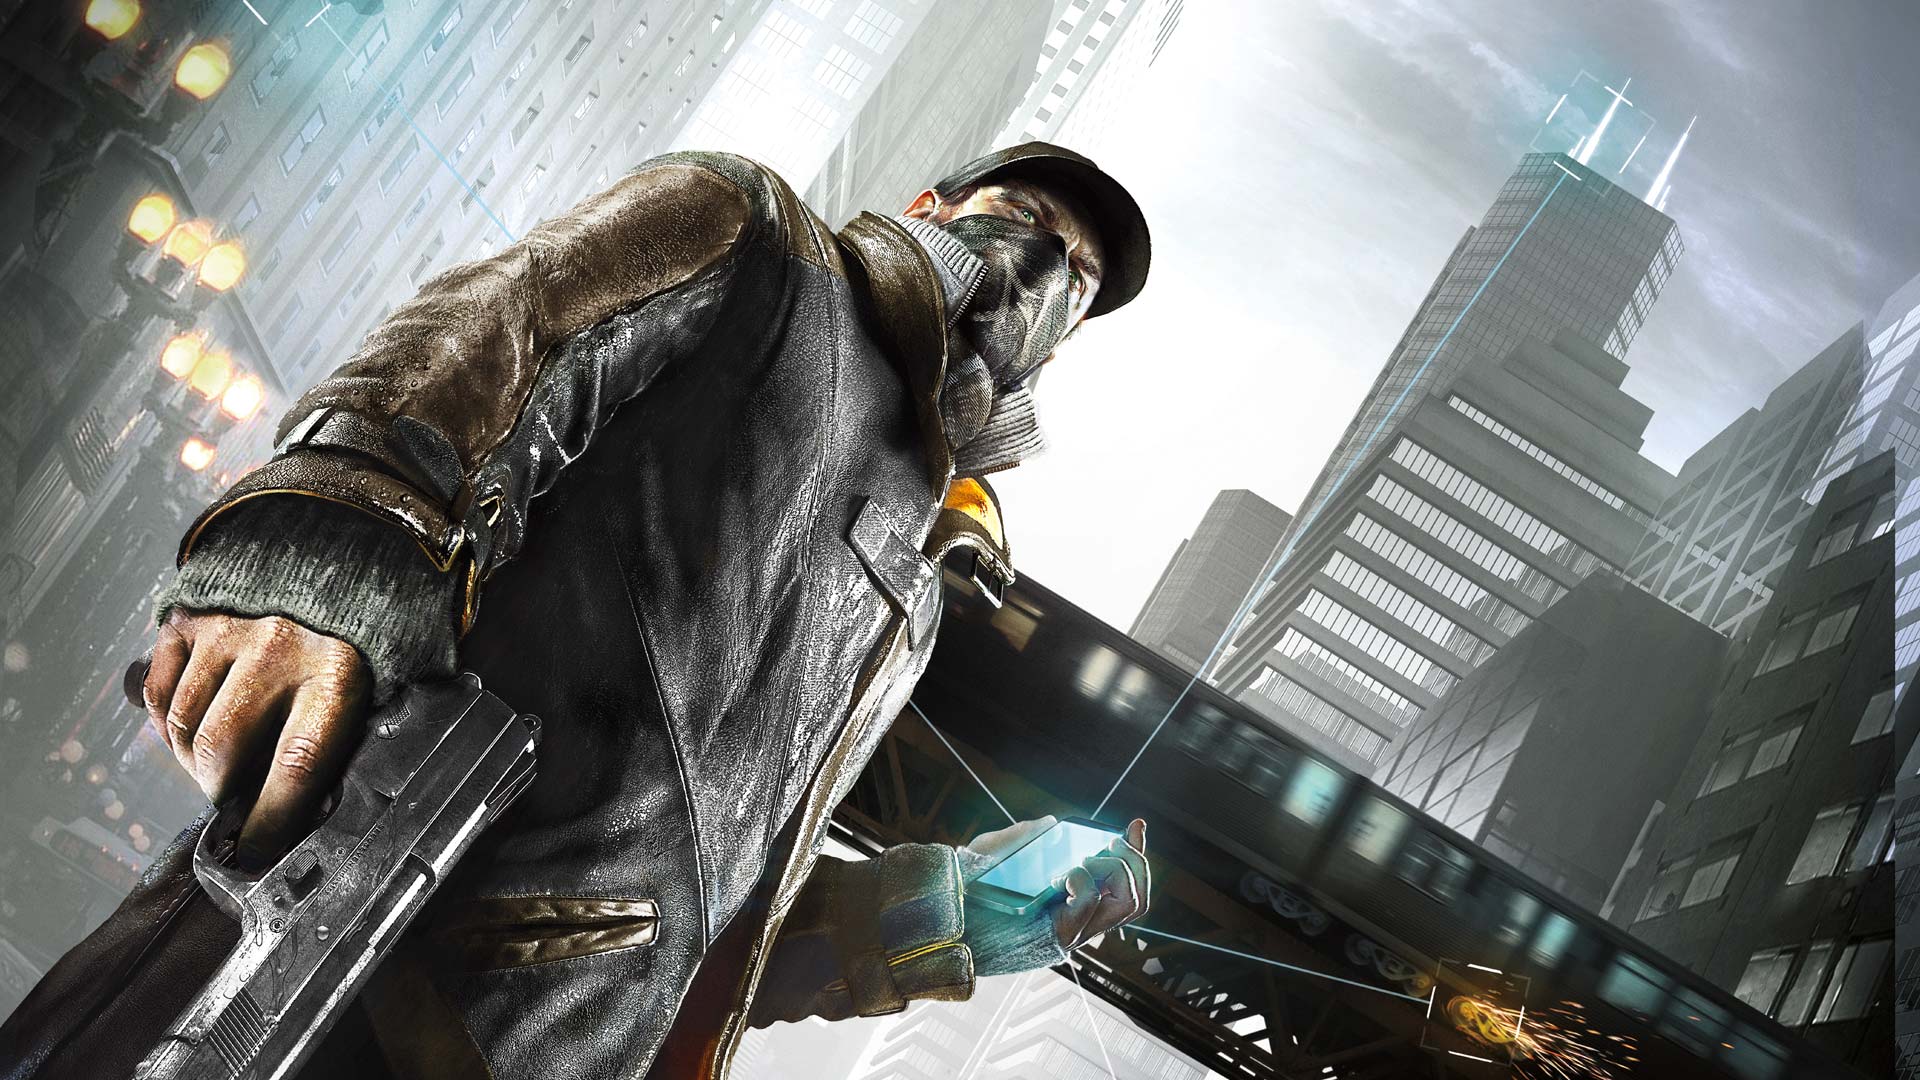 Watch dogs on steam фото 10